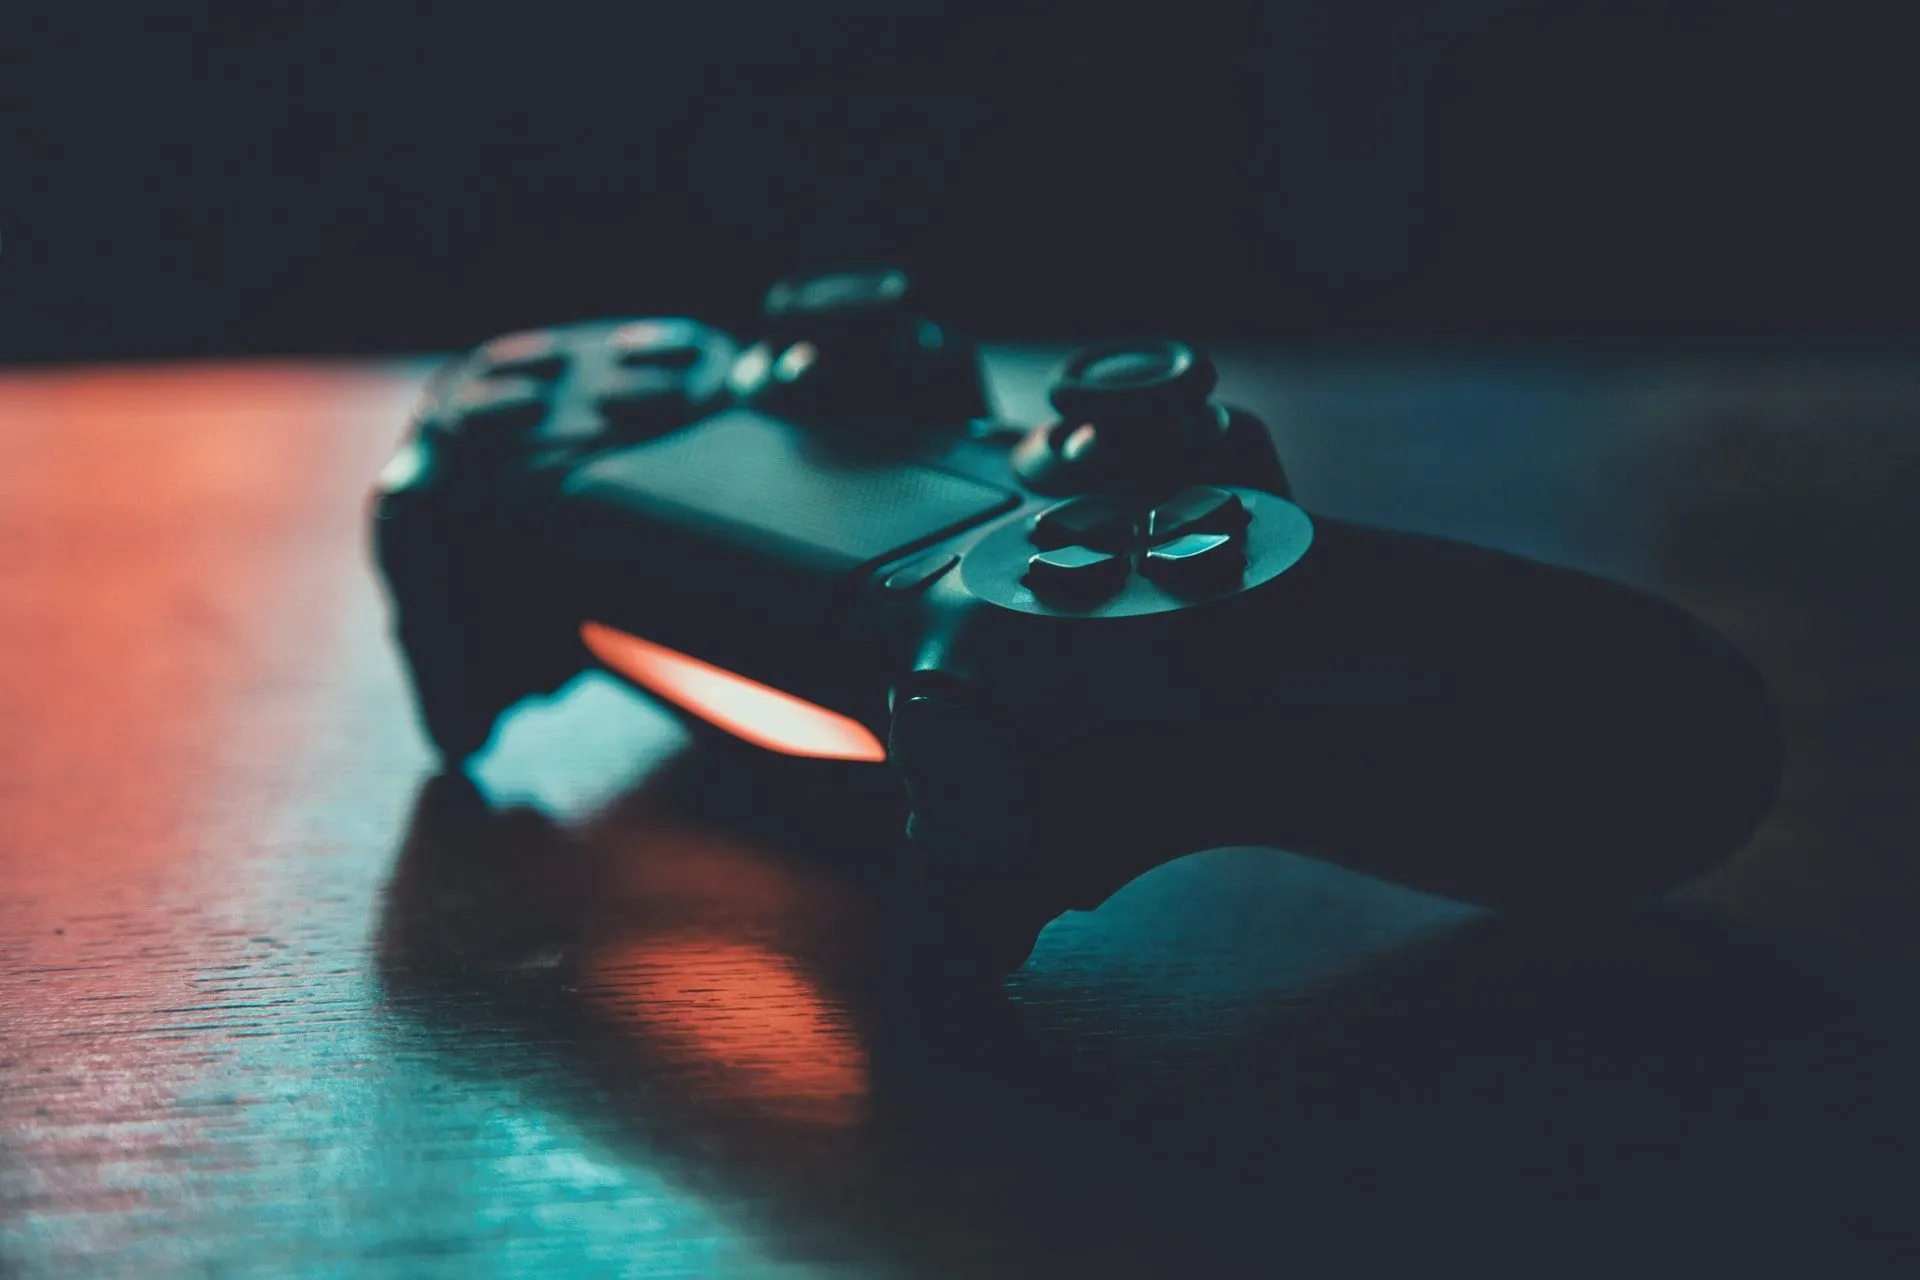 The video gaming industry is growing immensely.